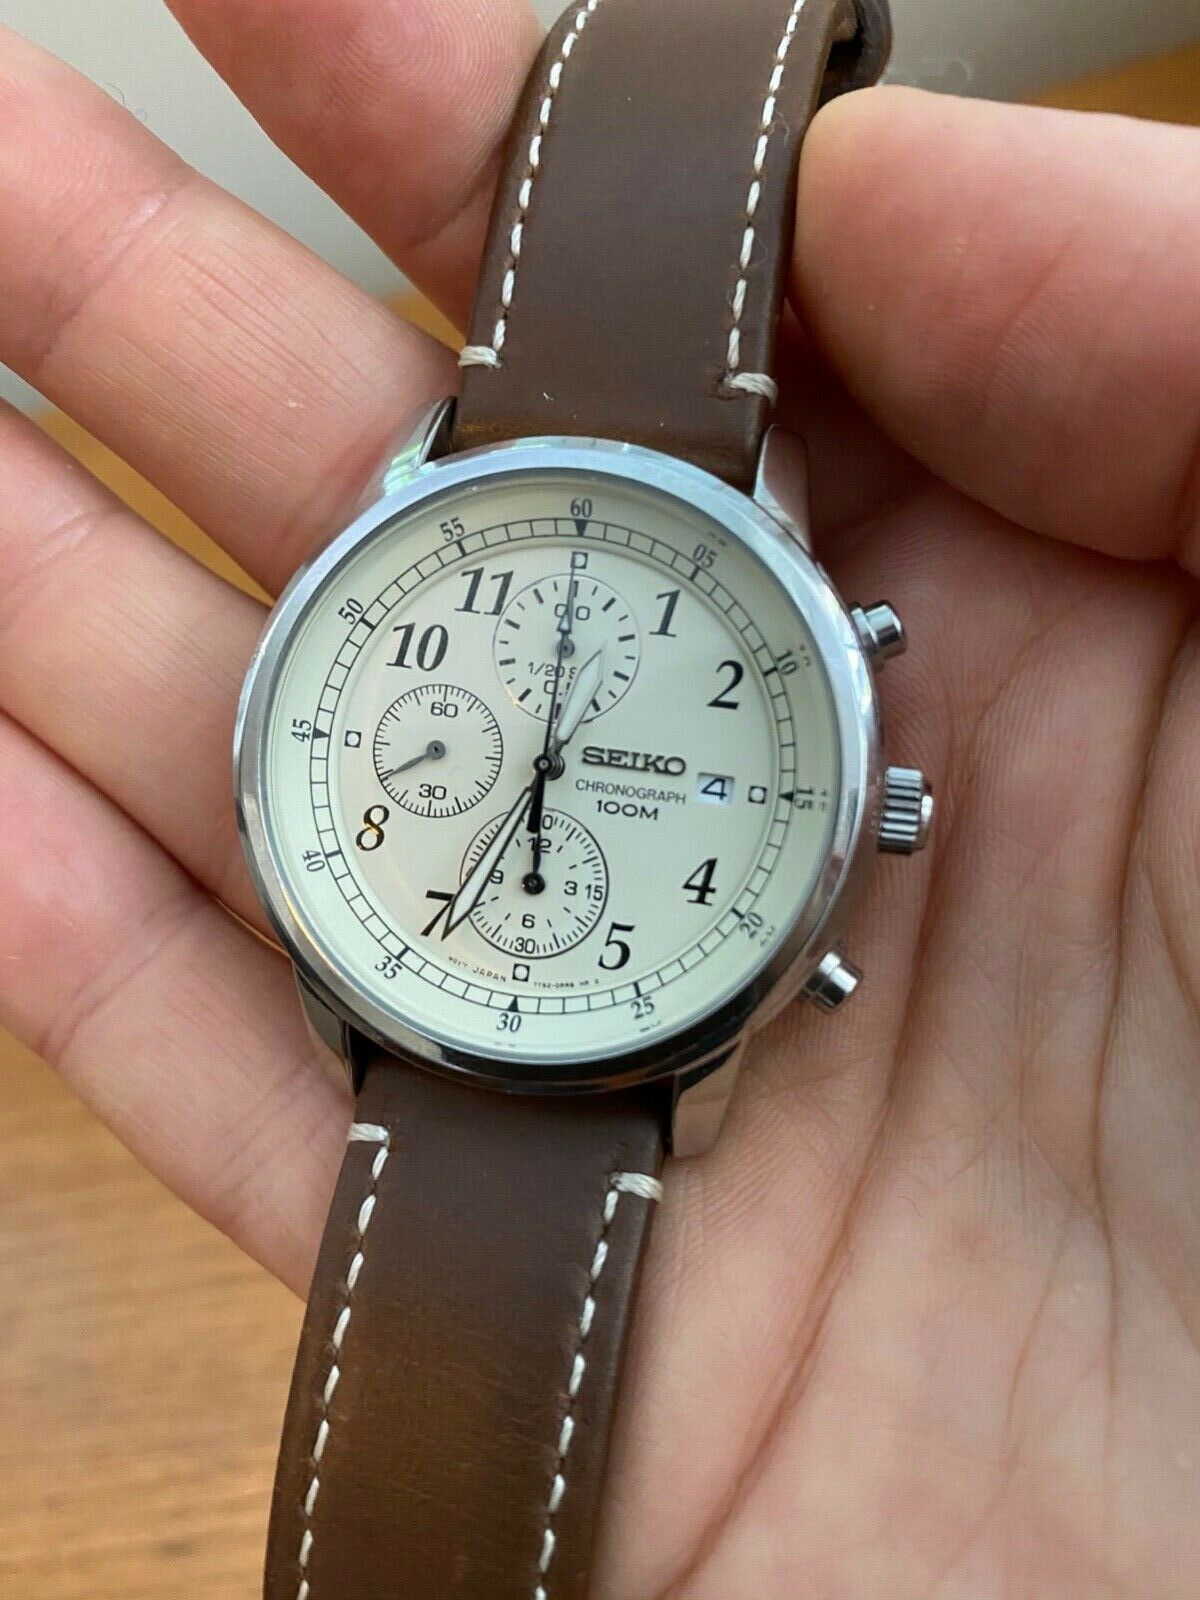 SNDC31 40mm Quartz Chronograph with brown leather strap + extras |